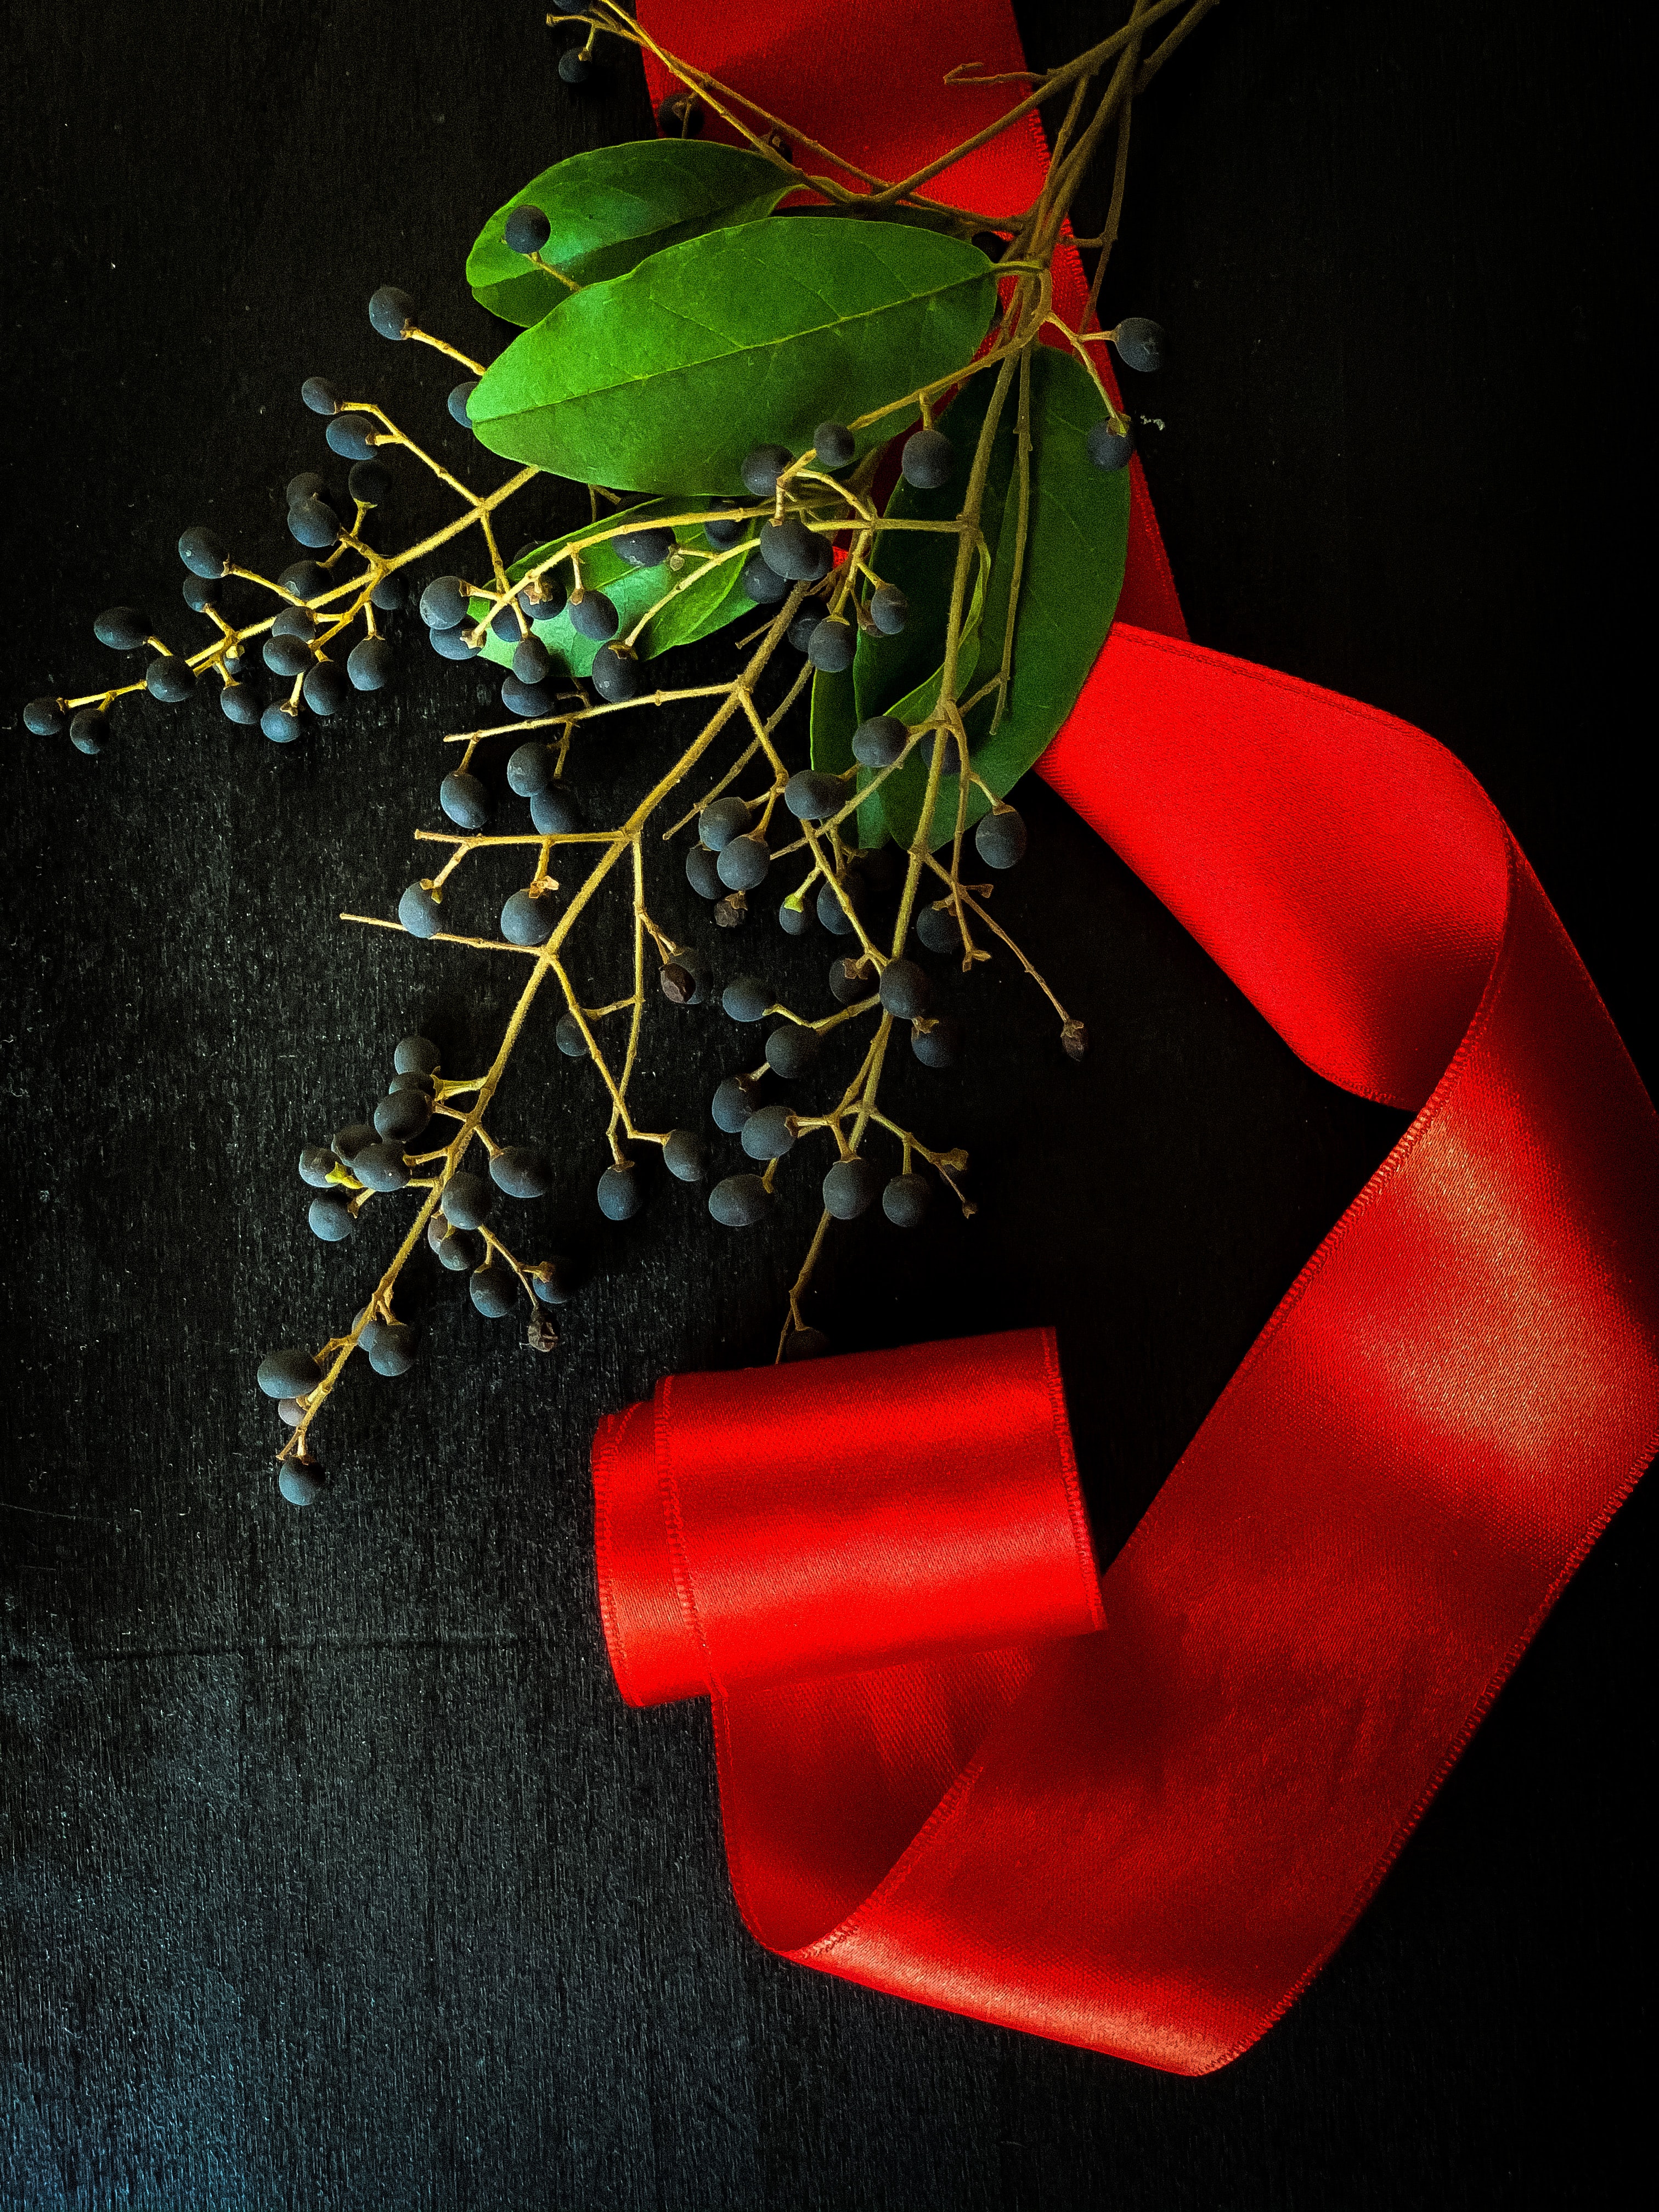 berries, red, miscellanea, miscellaneous, branch, tape